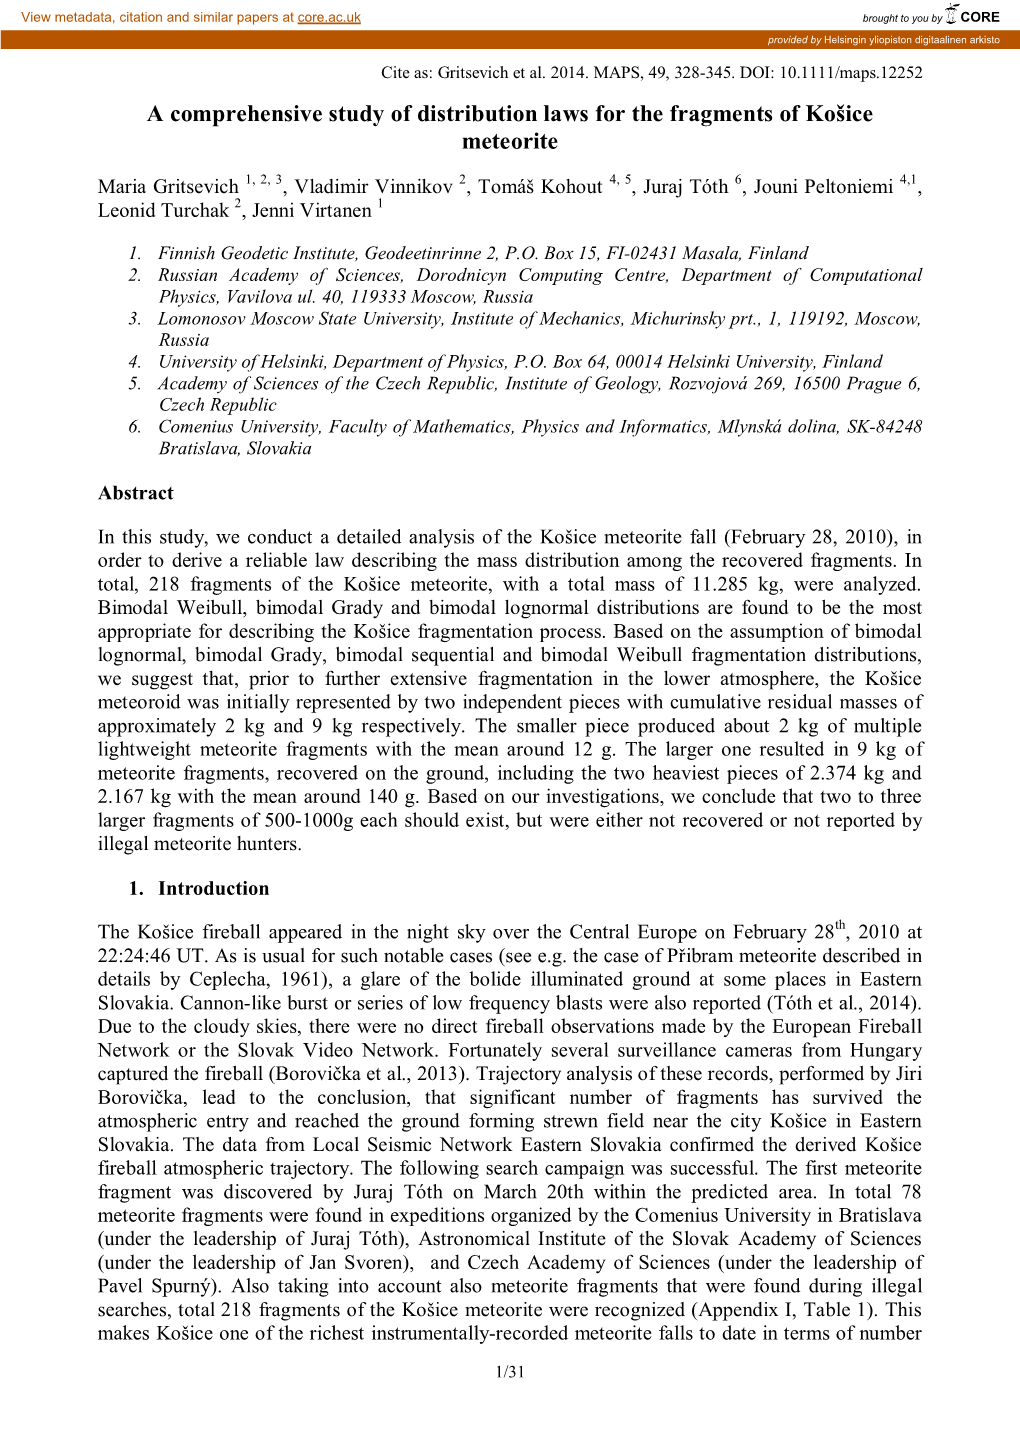 A Comprehensive Study of Distribution Laws for the Fragments of Košice Meteorite